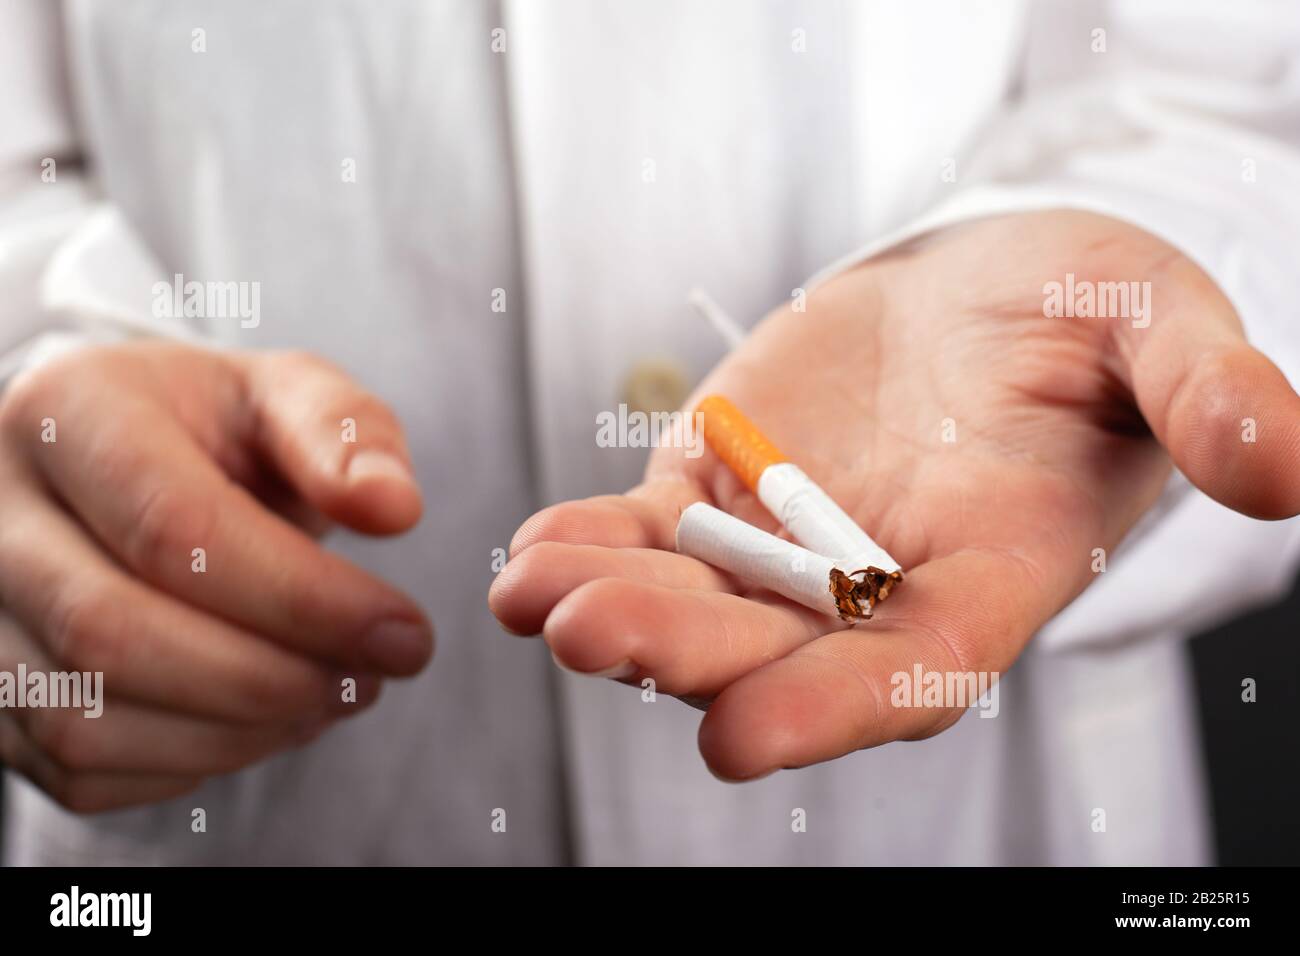 doctor holds a broken cigarette in his hand. harm from smoking. lung cancer disease harm from nicotine. Stock Photo